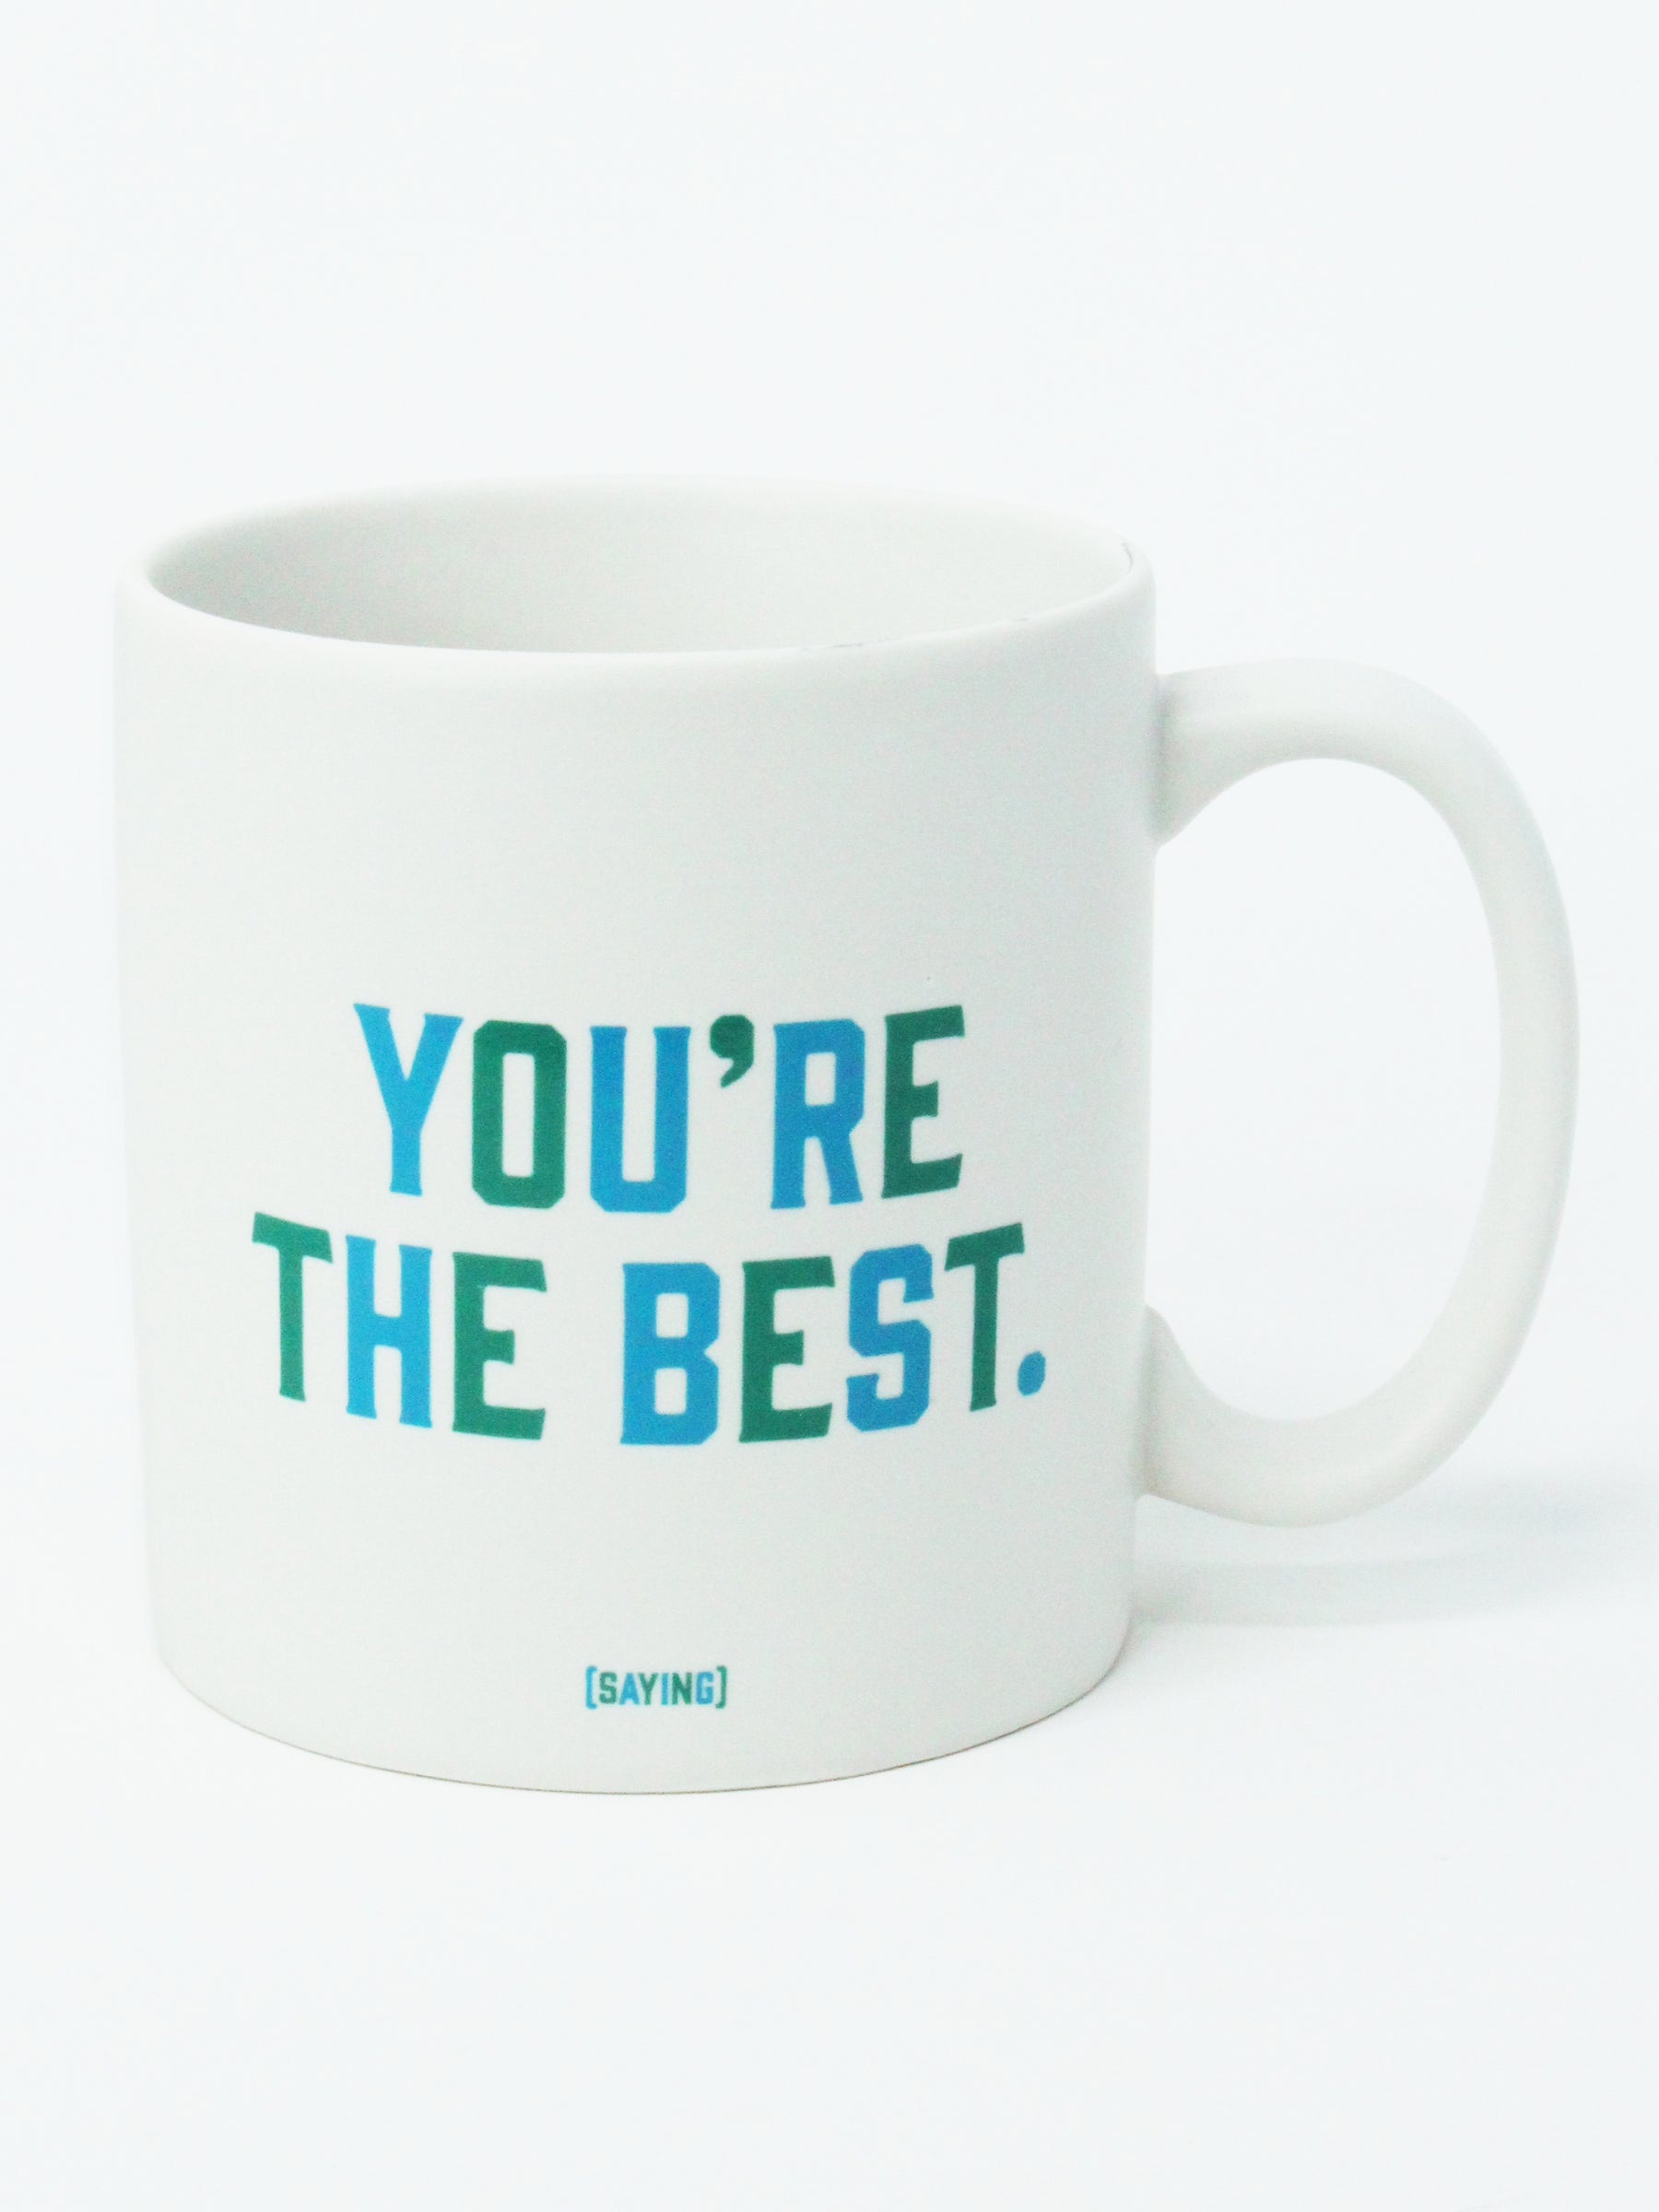 You're The Best Mug